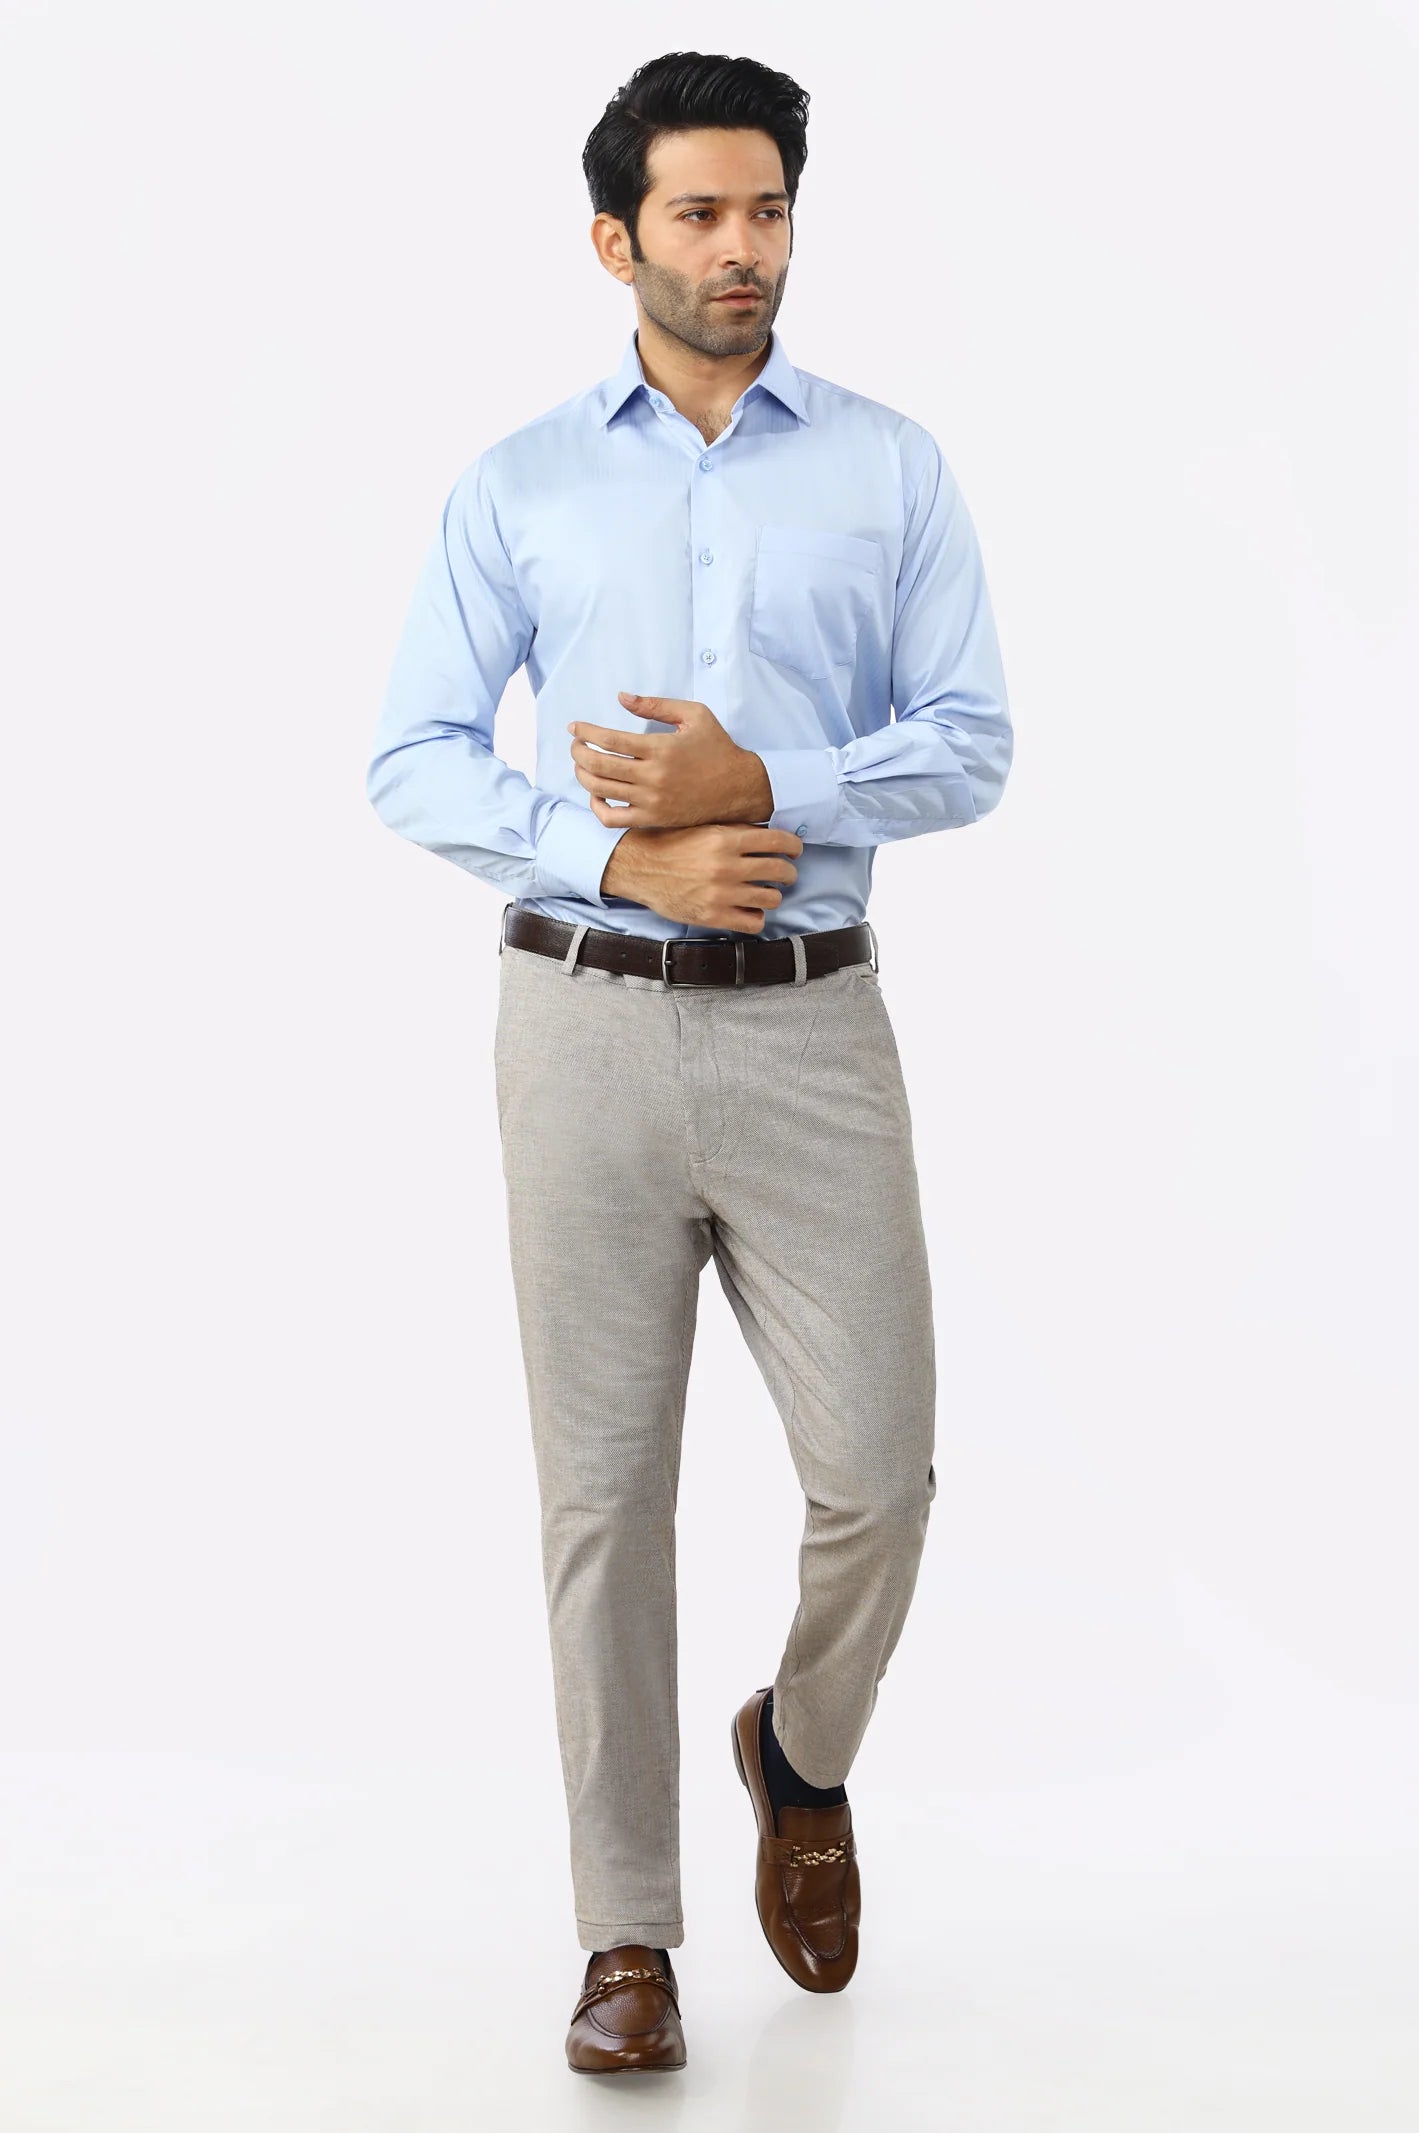 Sky Blue Textured Formal Shirt From Diners